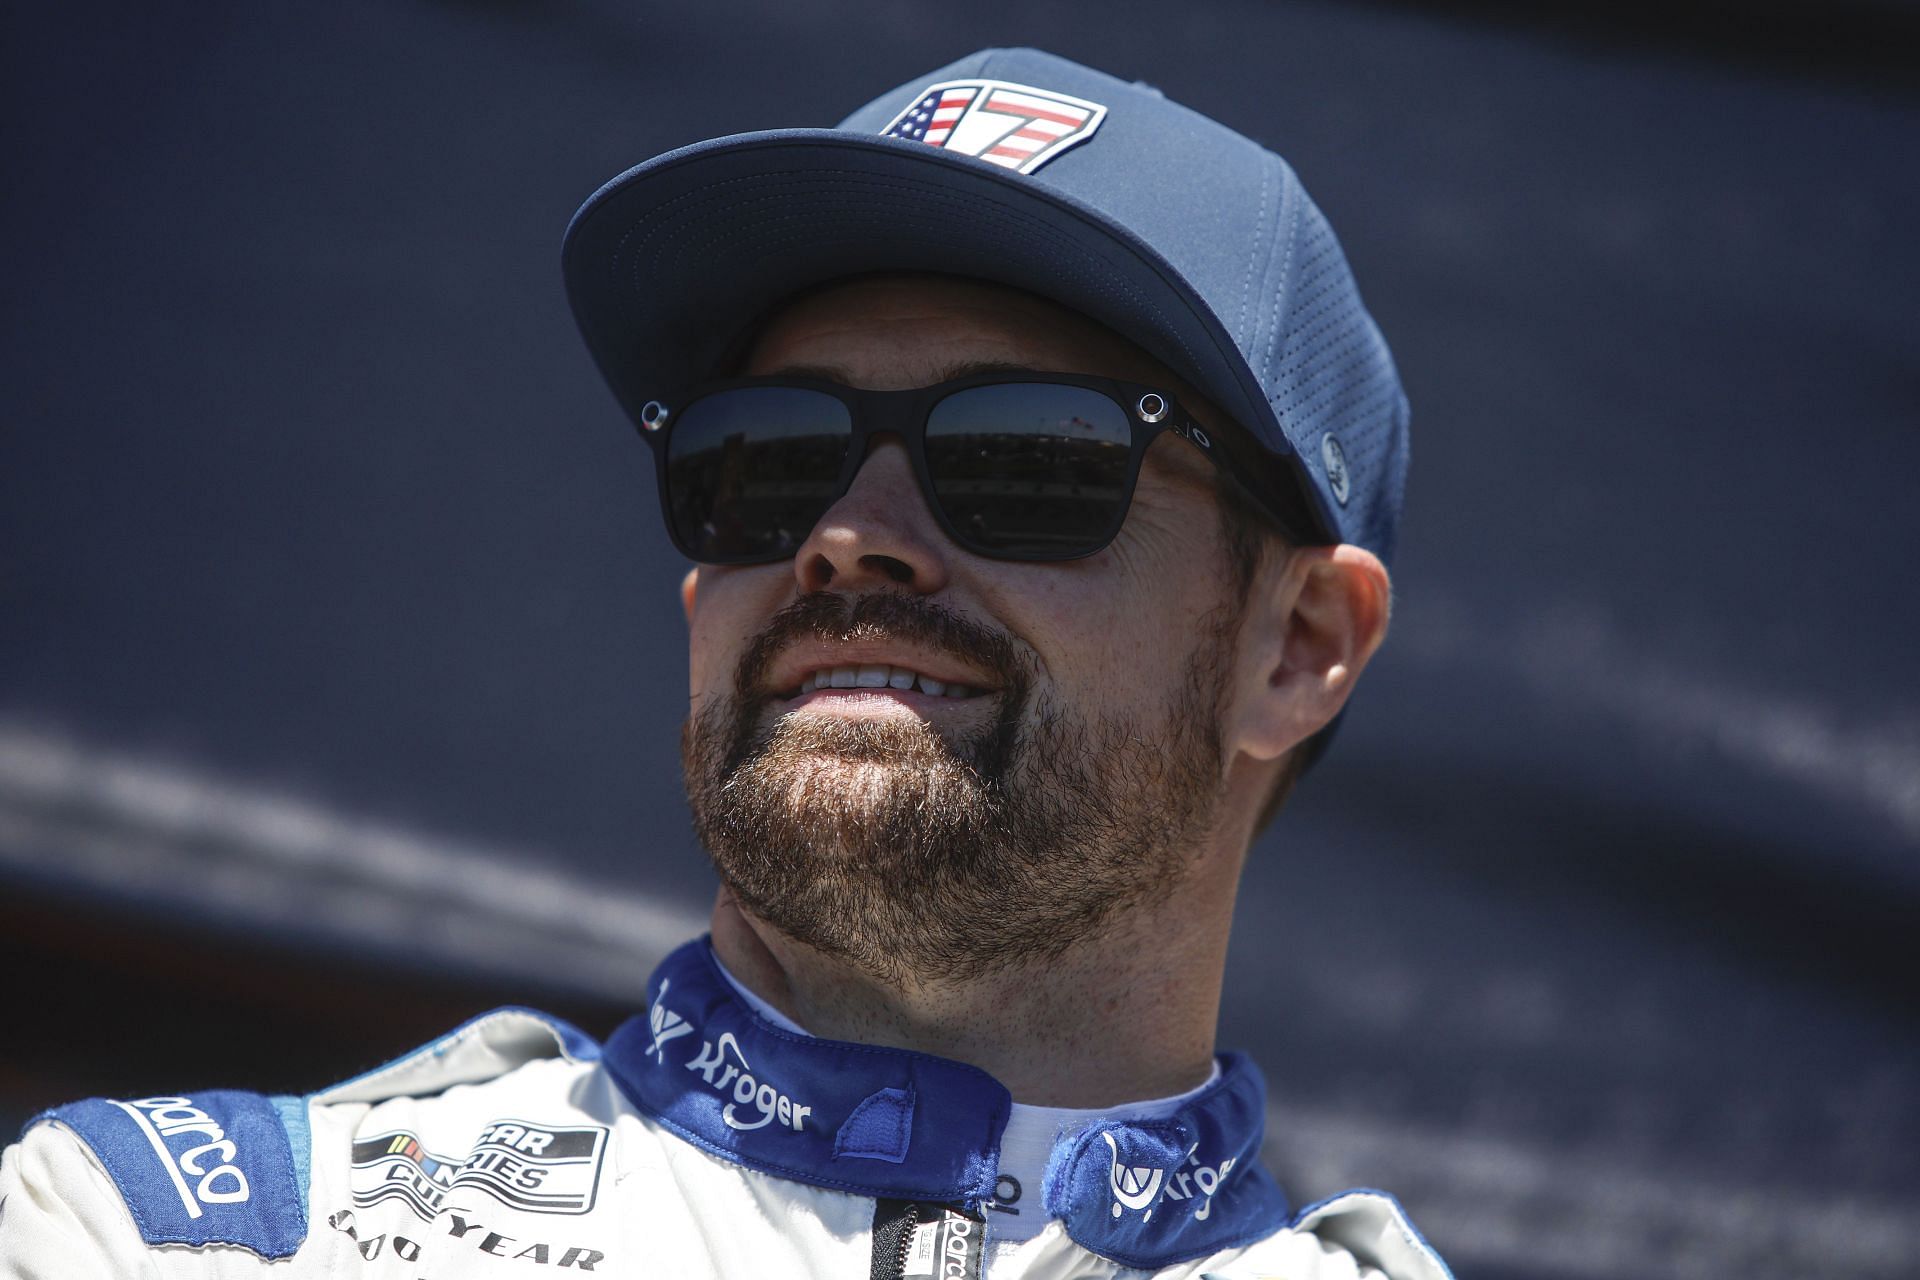 Ricky Stenhouse Jr. during driver intros before the 2022 NASCAR Cup Series Folds of Honor QuikTrip 500 at Atlanta Motor Speedway in Hampton, Georgia (Photo by Sean Gardner/Getty Images)